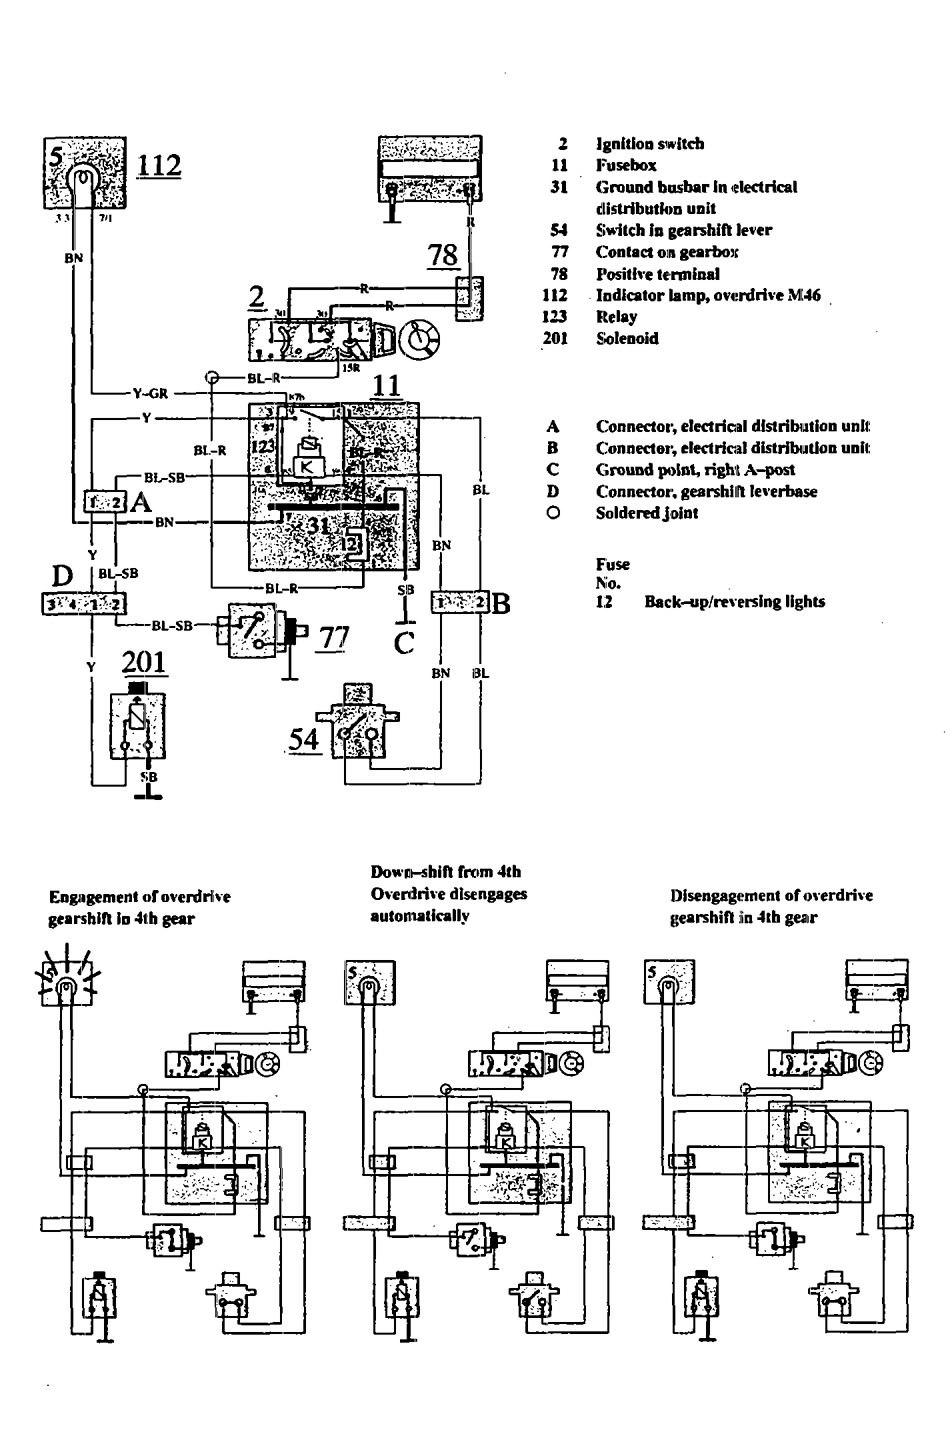 Diagram Volvo 940 Overdrive Wiring Diagram Full Version Hd Quality Wiring Diagram Diagramati Mbreporter It